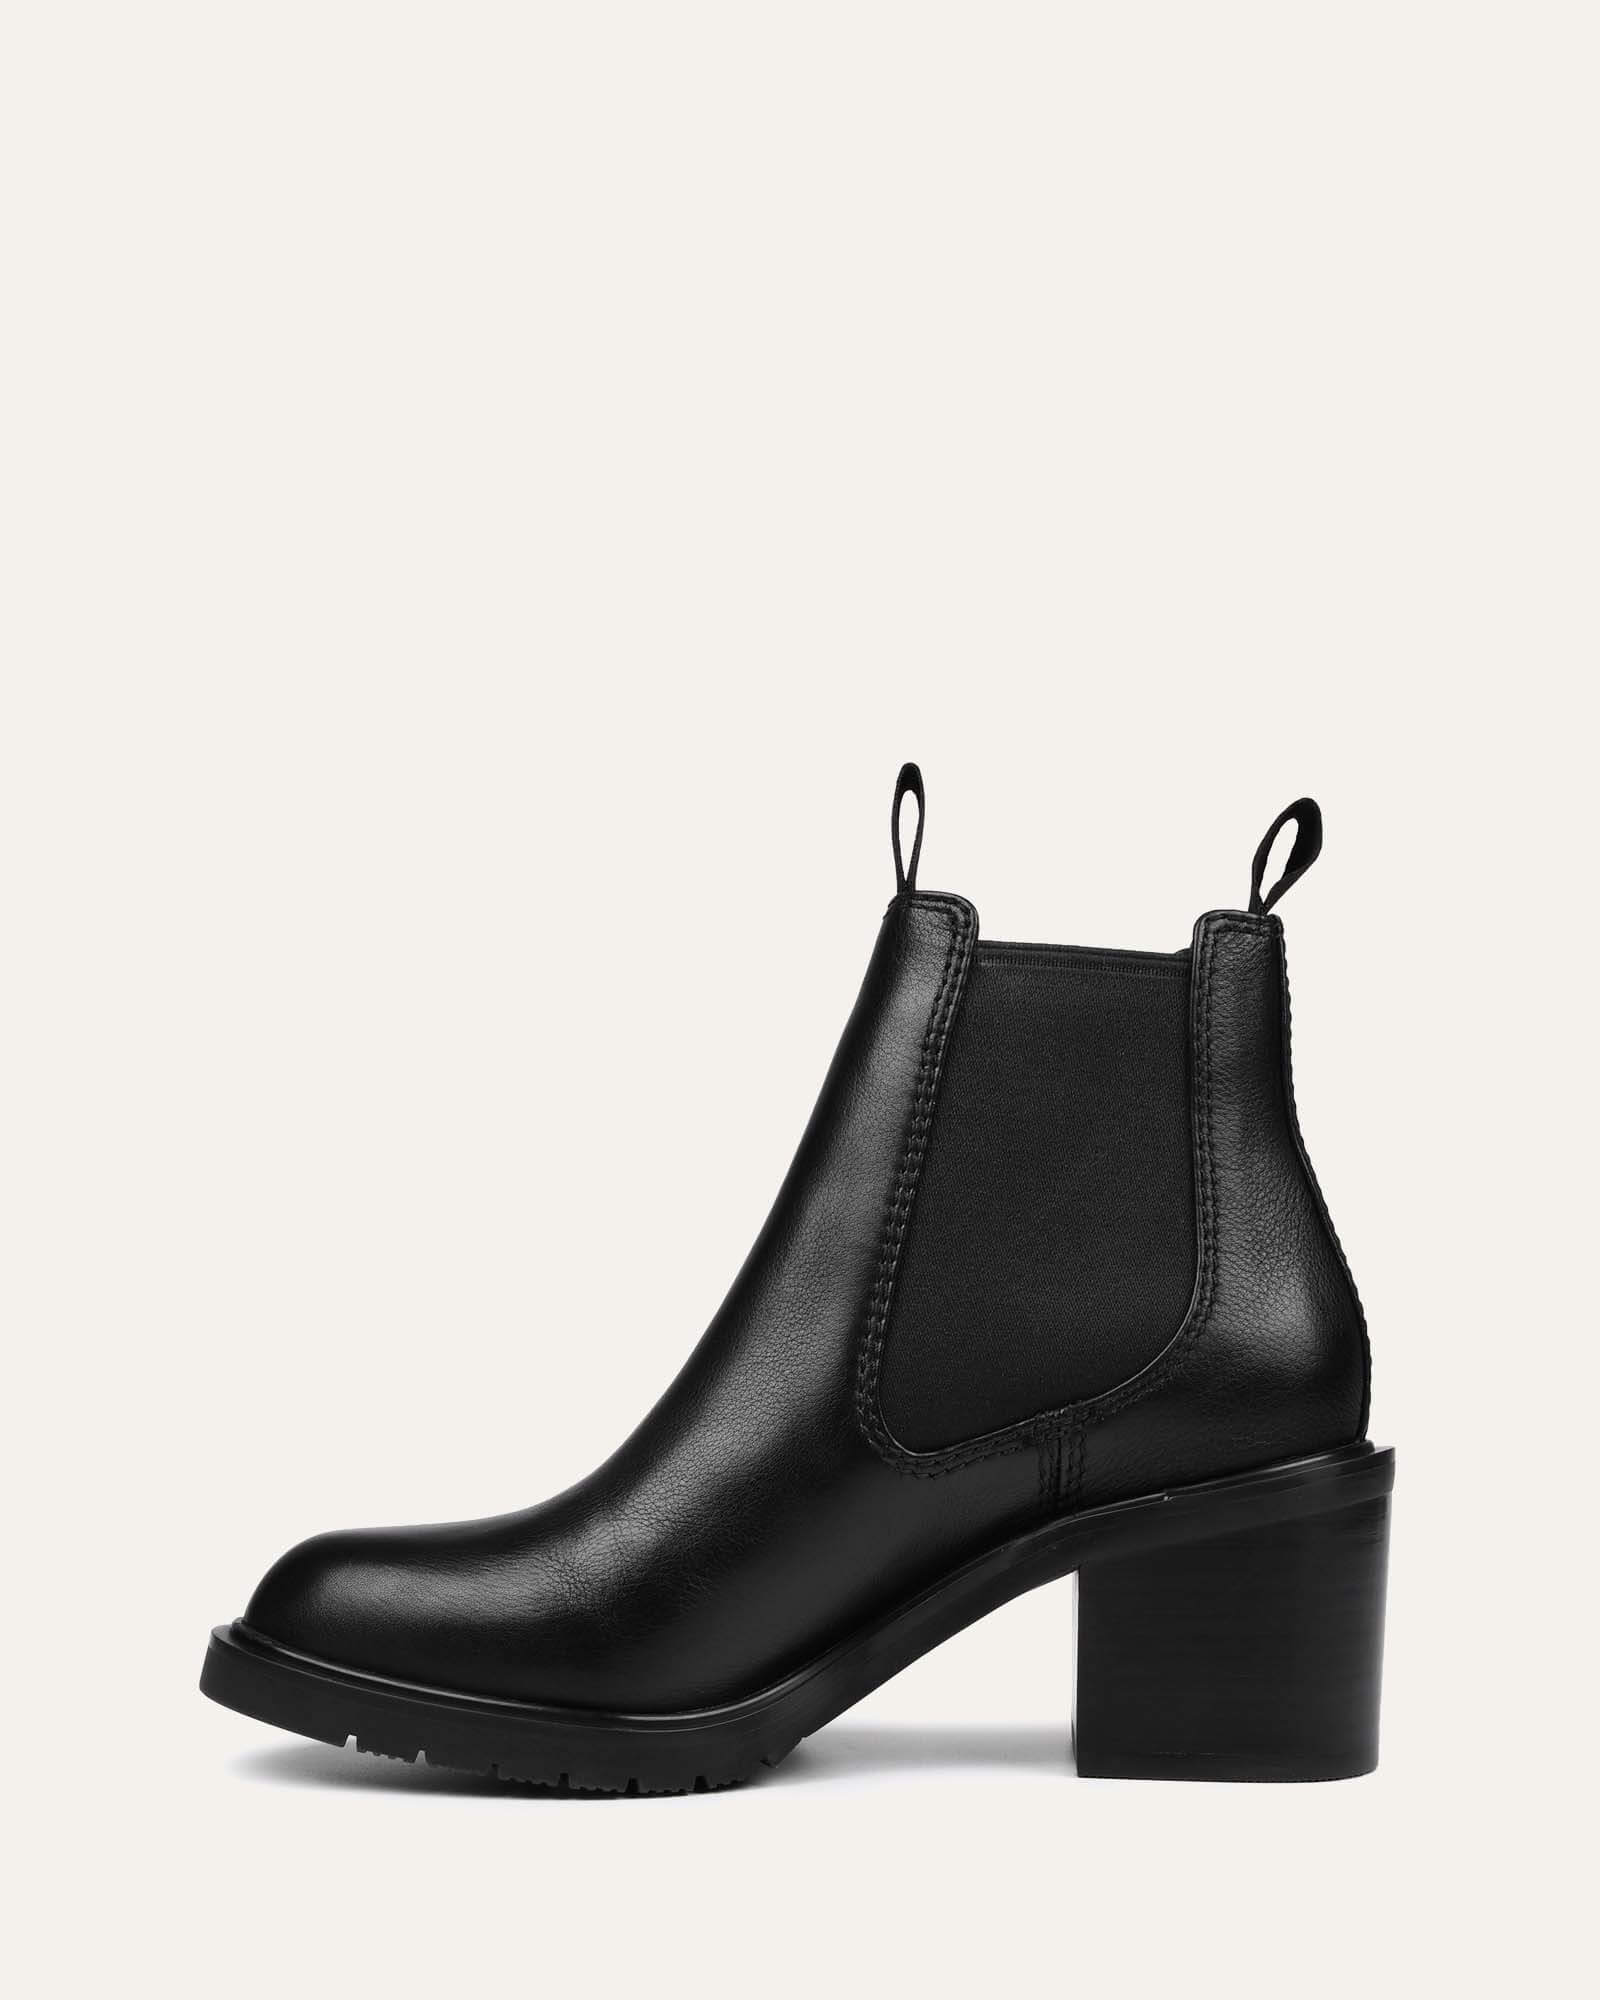 AYLA MID ANKLE BOOTS BLACK LEATHER - Jo Mercer